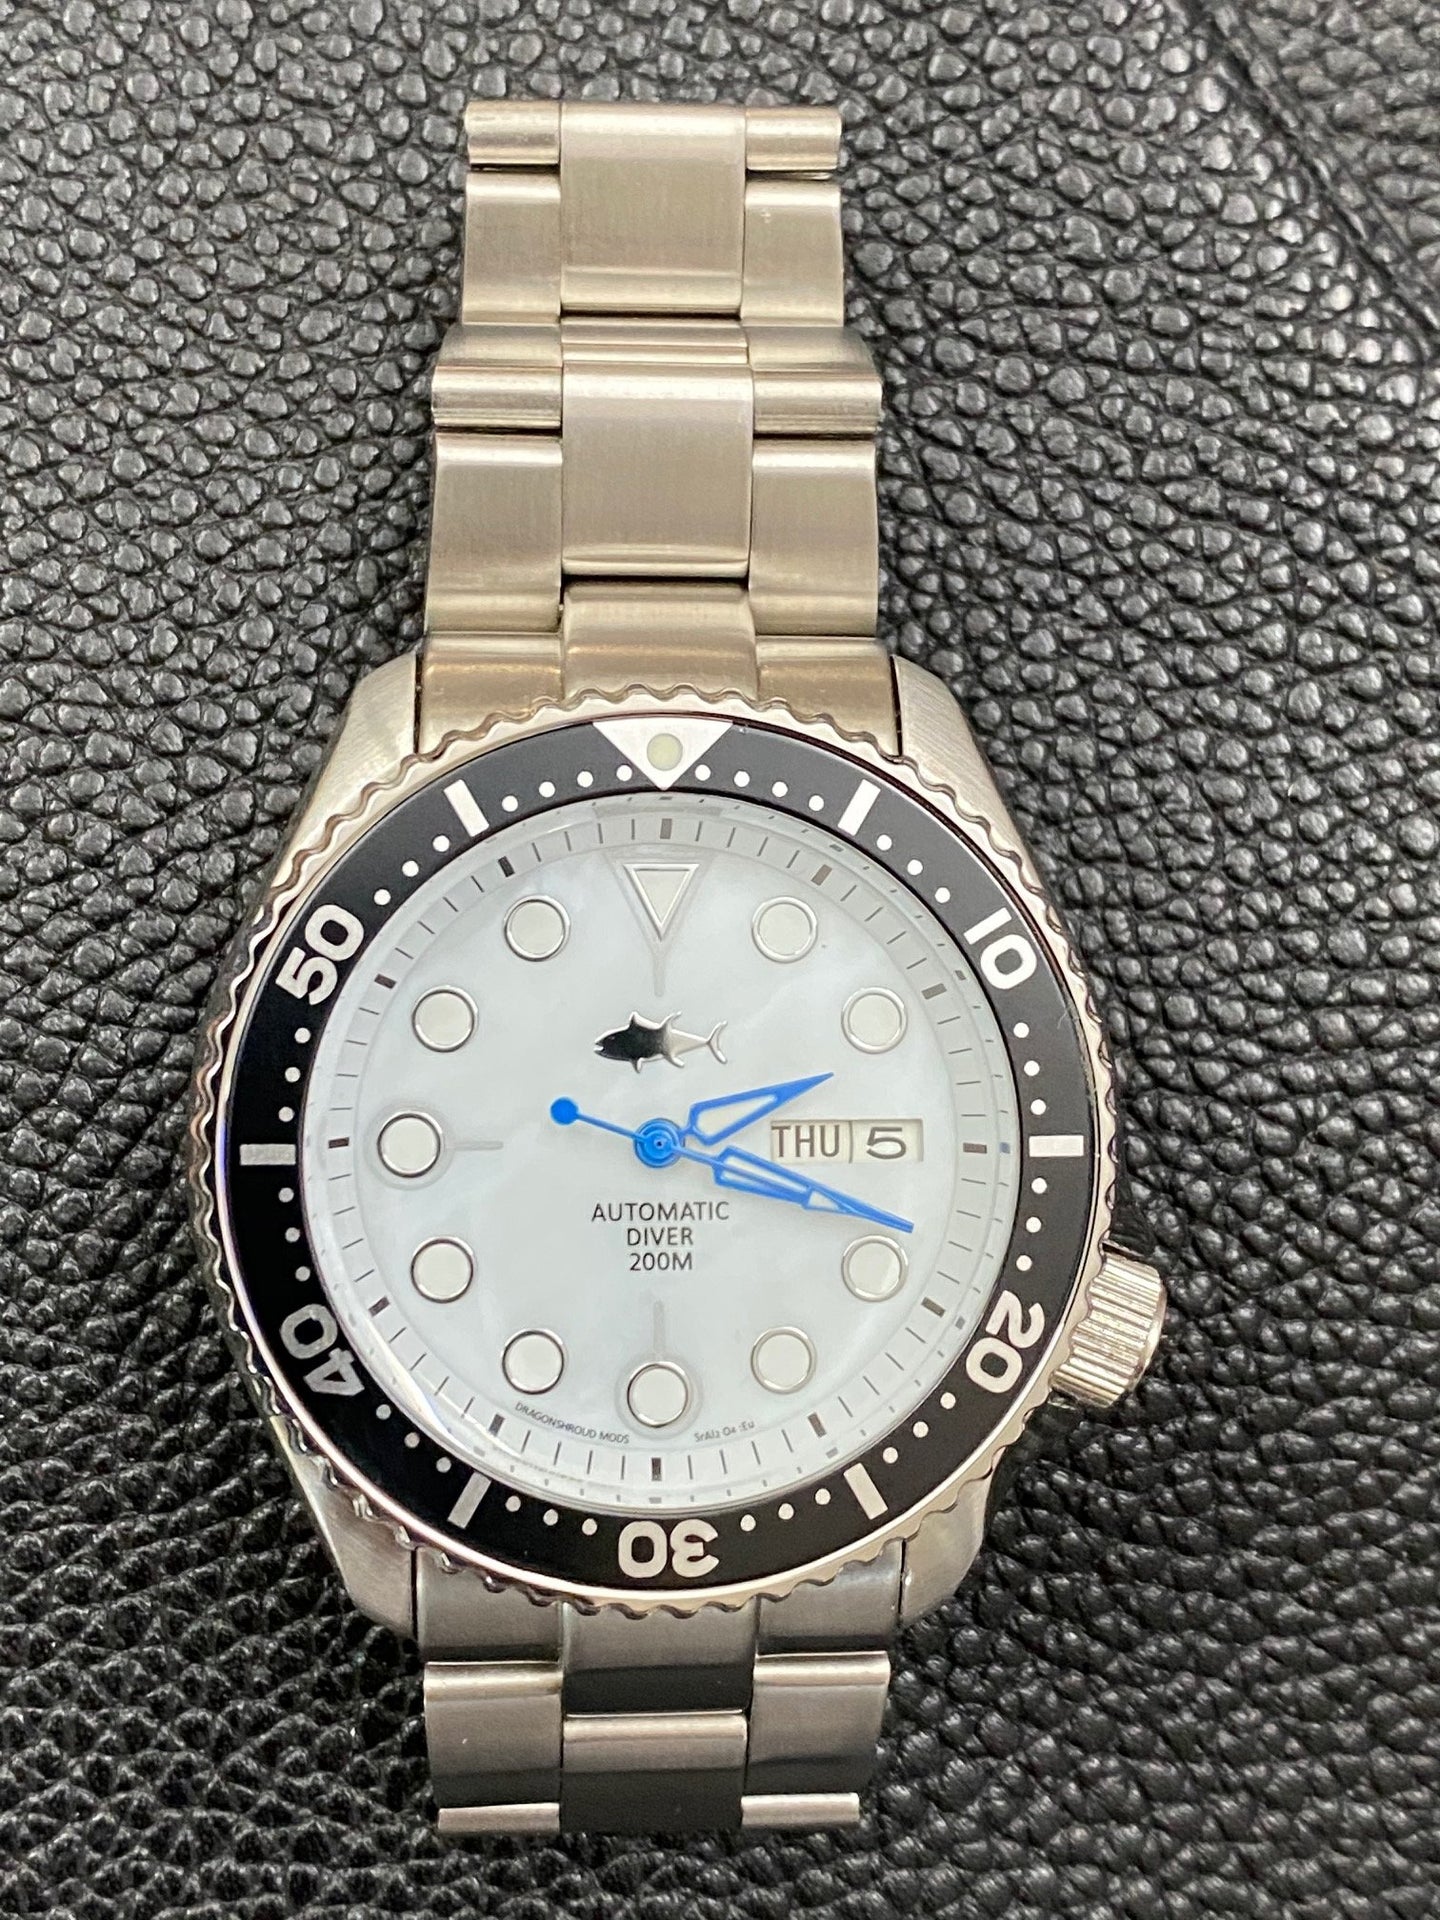 FS: Modded Seiko SKX007 - Mother of Pearl Dial | WatchUSeek Watch Forums